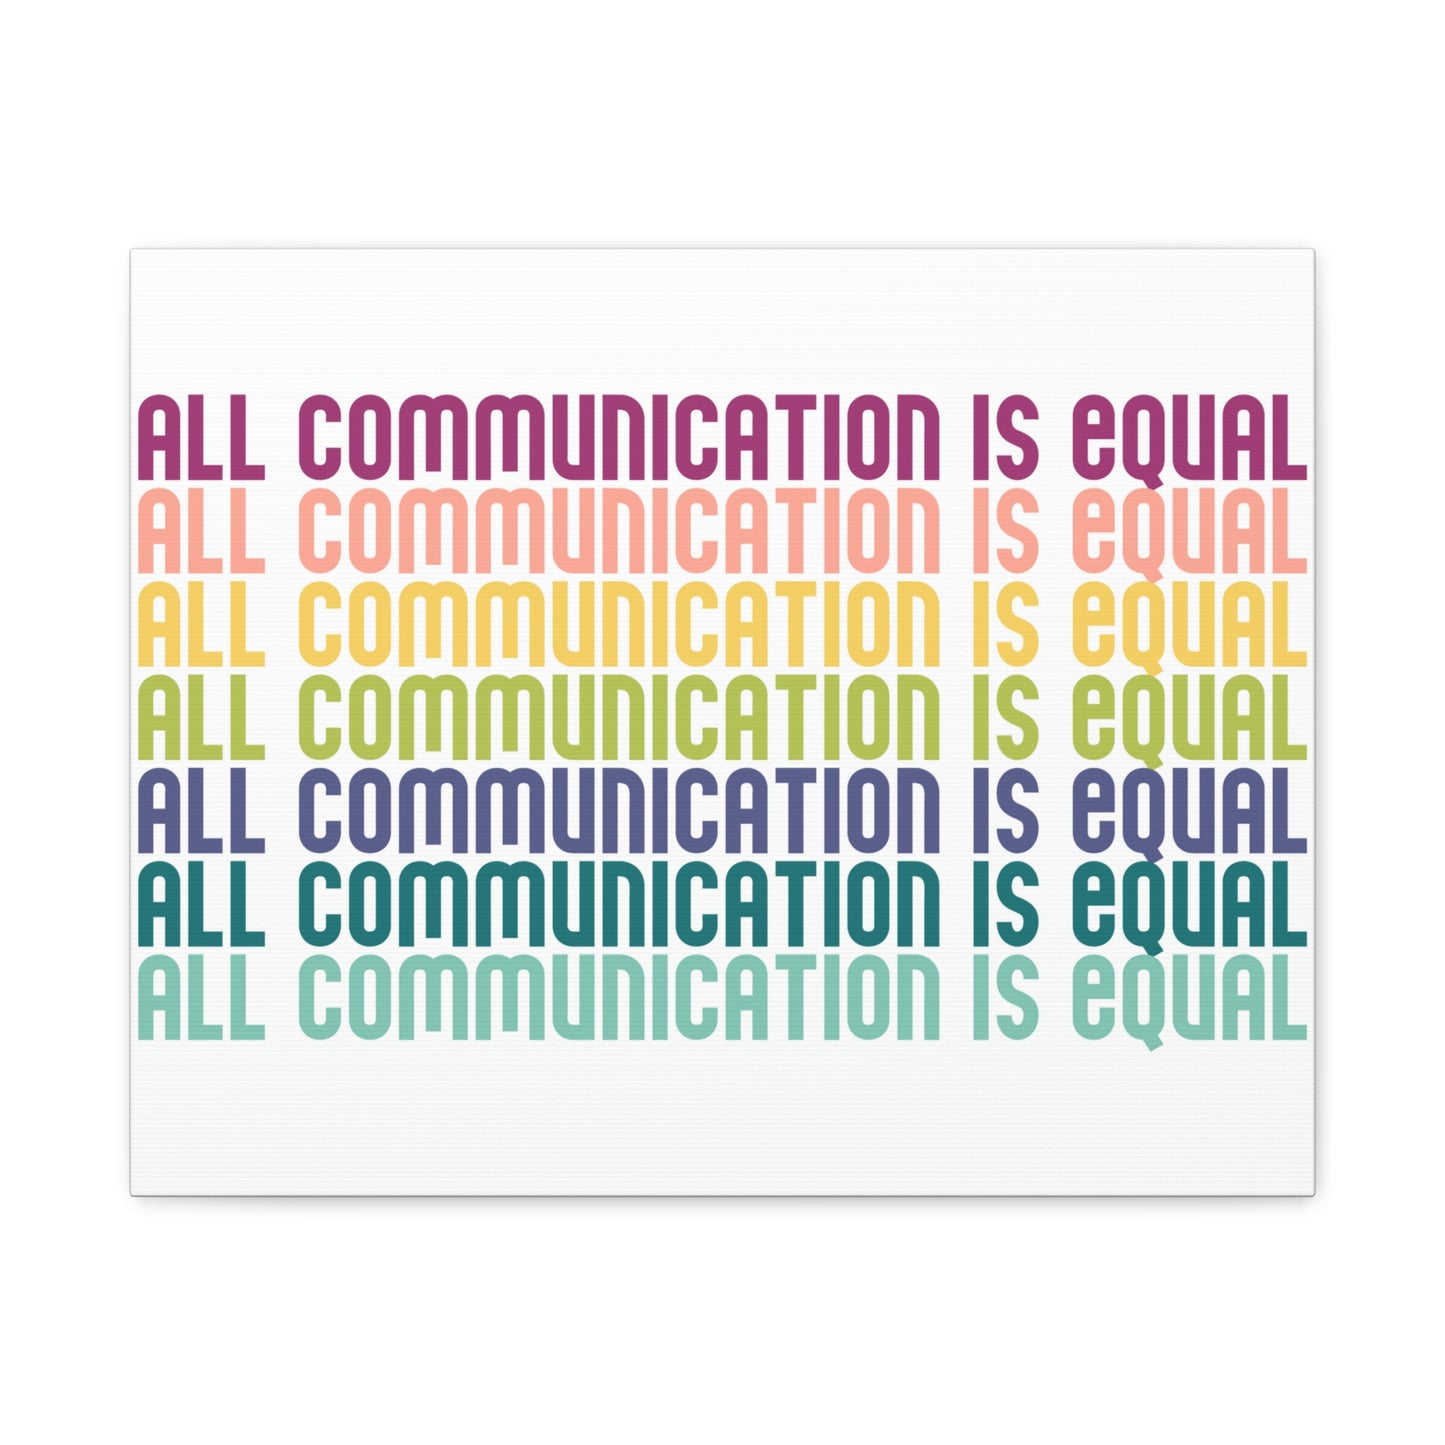 All Communication is Equal Canvas Print (20 x 16 in)